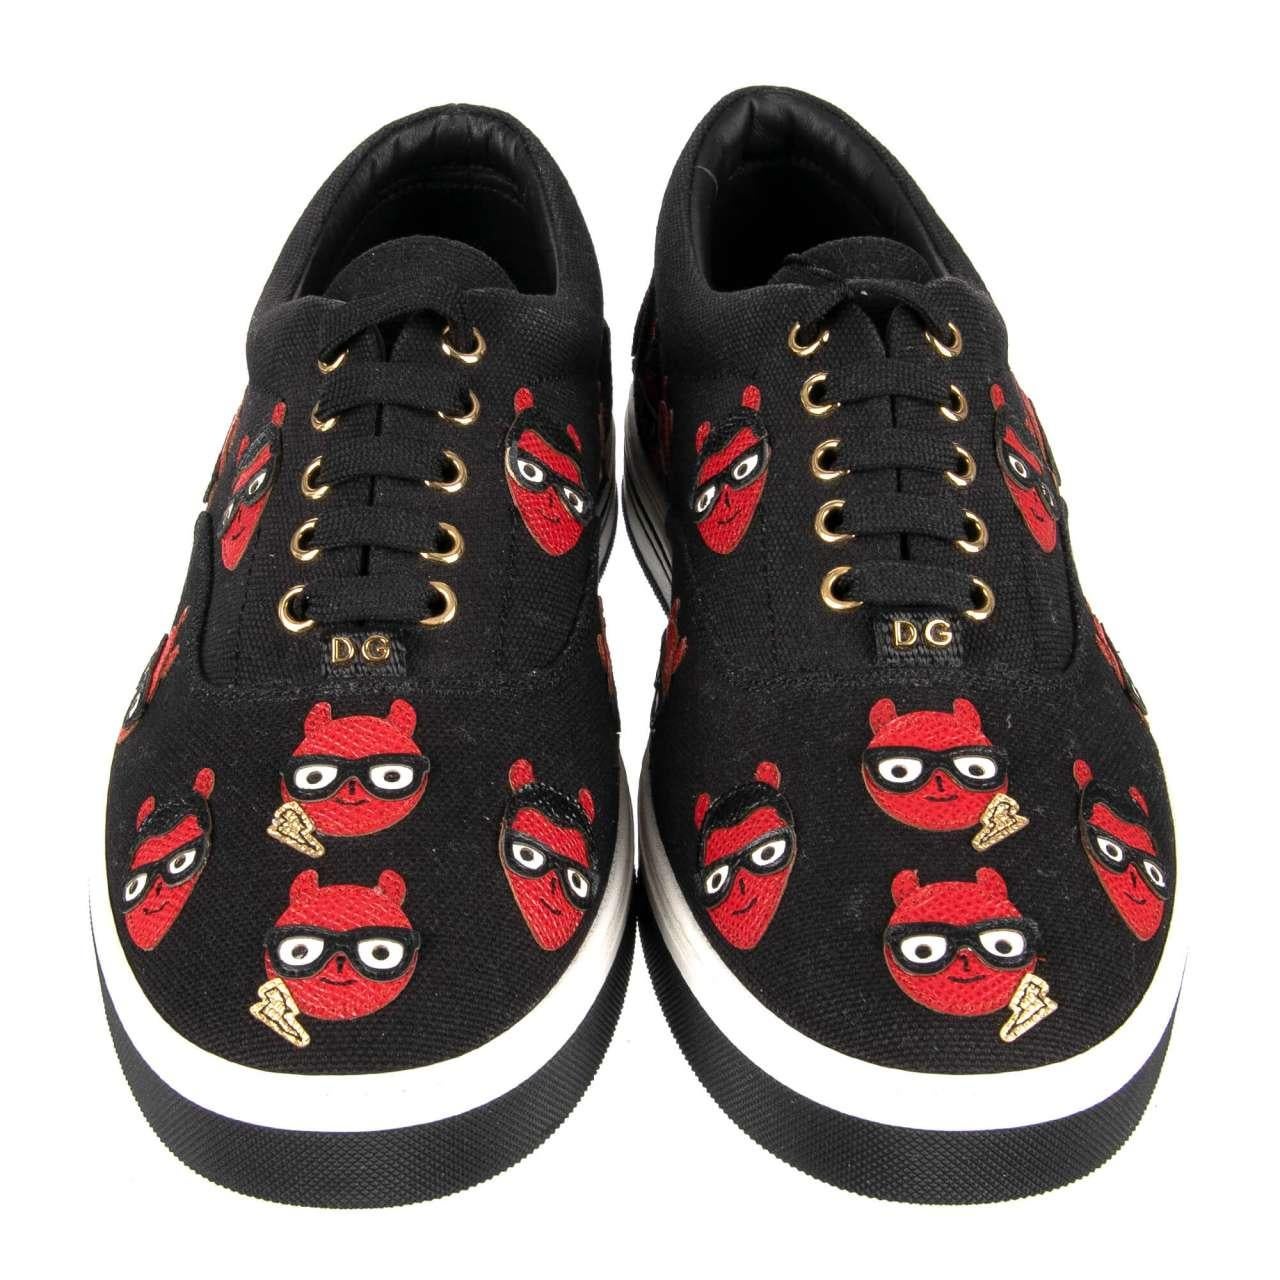 D&G Low-Top Canvas Sneaker ROMA with Leather Embroidery Black EUR 40.5 For Sale 2